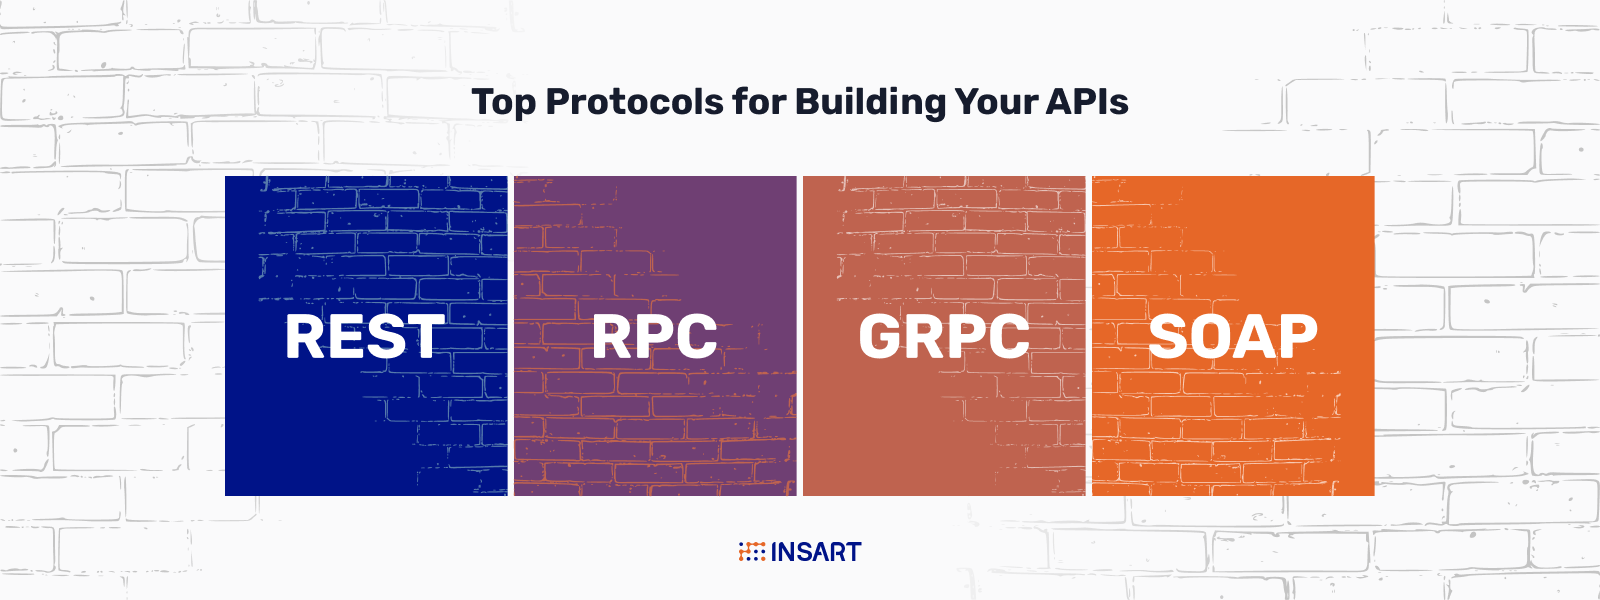 Top Protocols for Building APIs